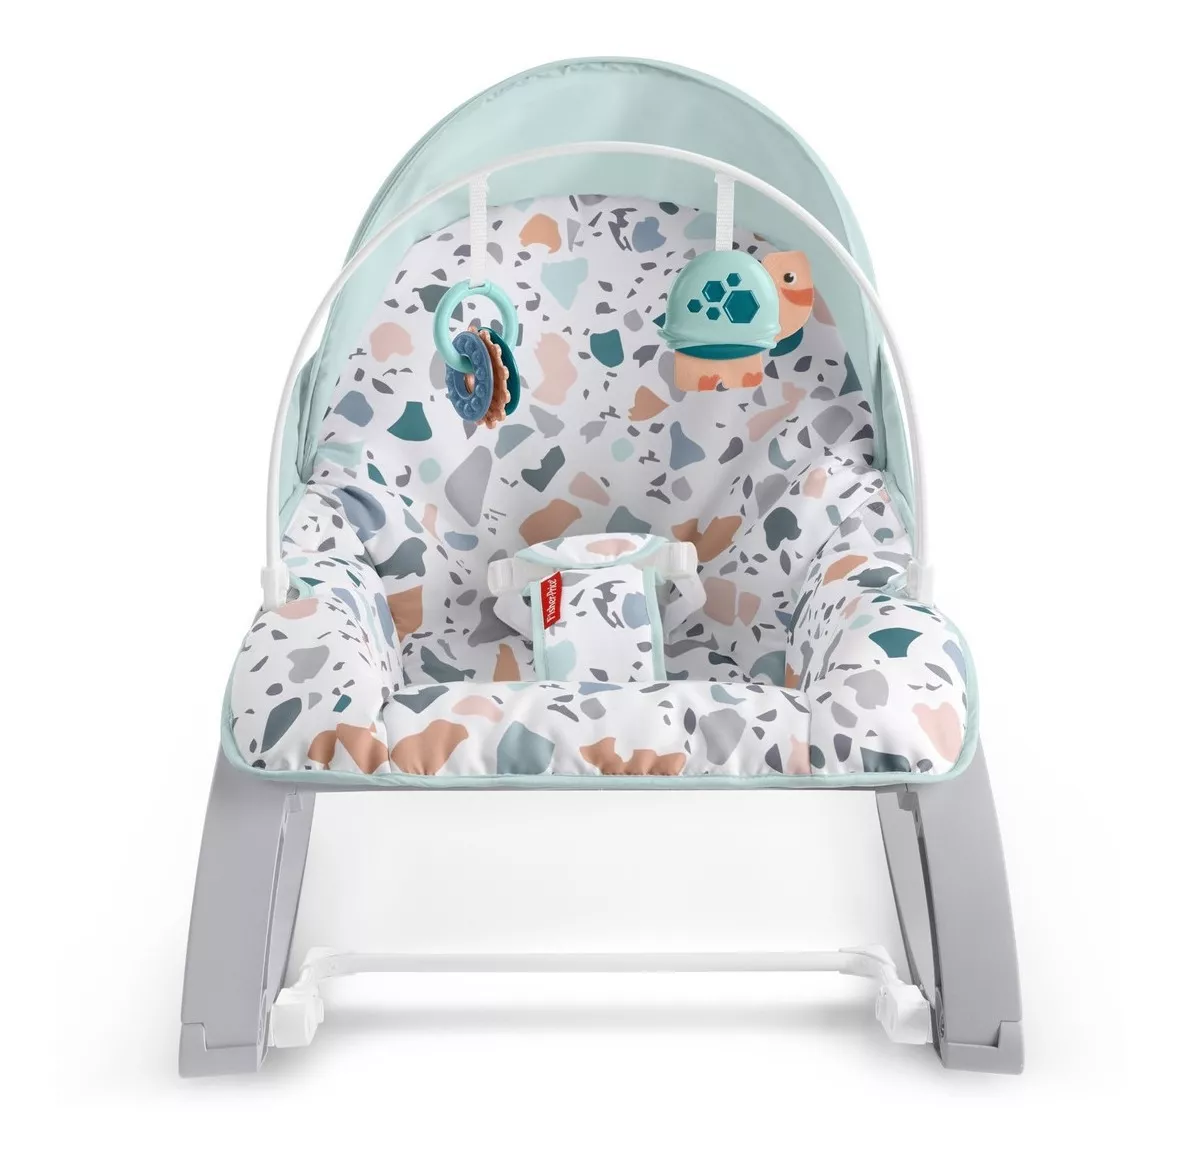 Silla Mecedora Para Bebé Fisher-price Deluxe Infant To Toddler Rocker Ghy58 Gris/agua